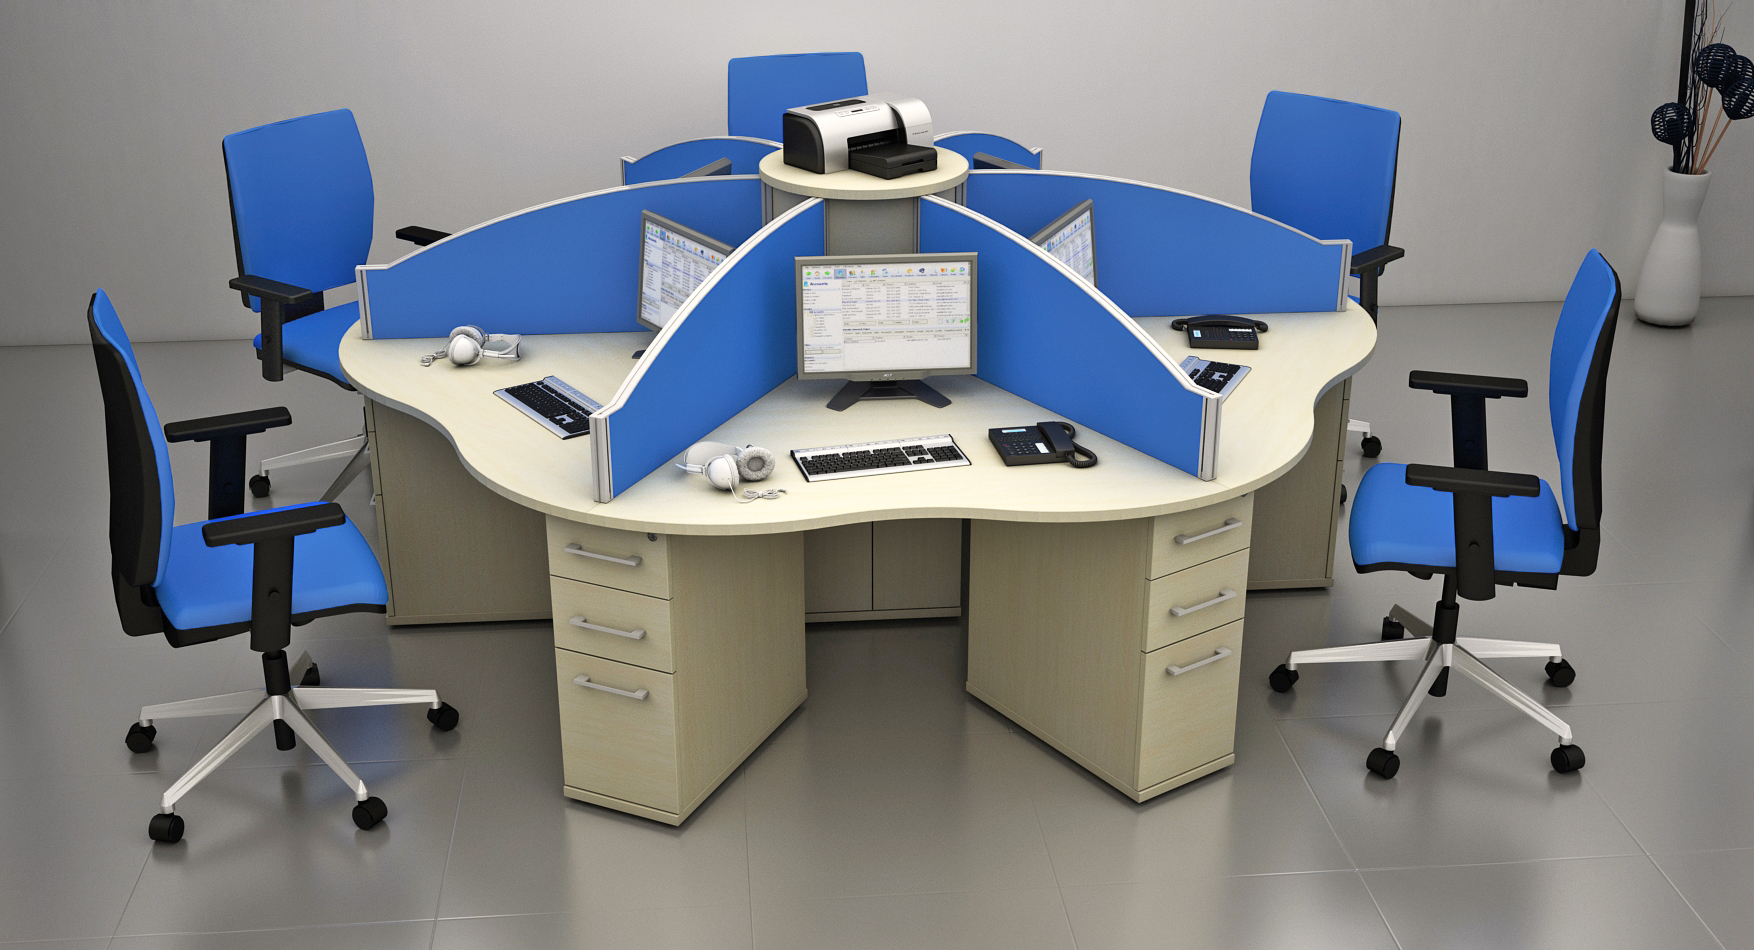 6 Person call centre desk configuration. With supporting pedestal, two shallow and one filing drawer